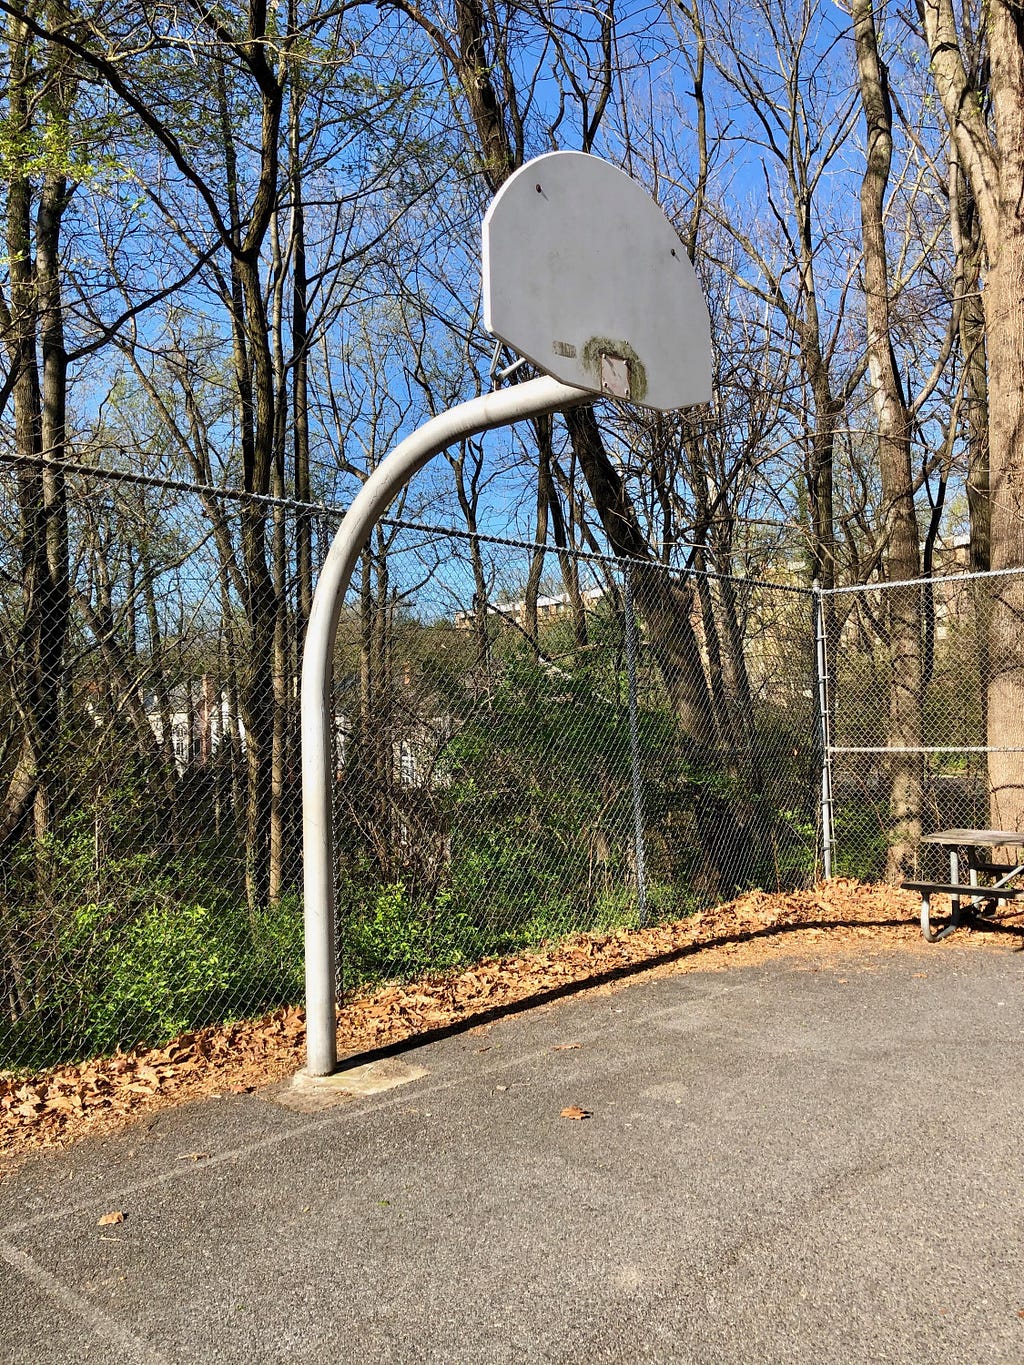 Image of the basketball court with the rims removed